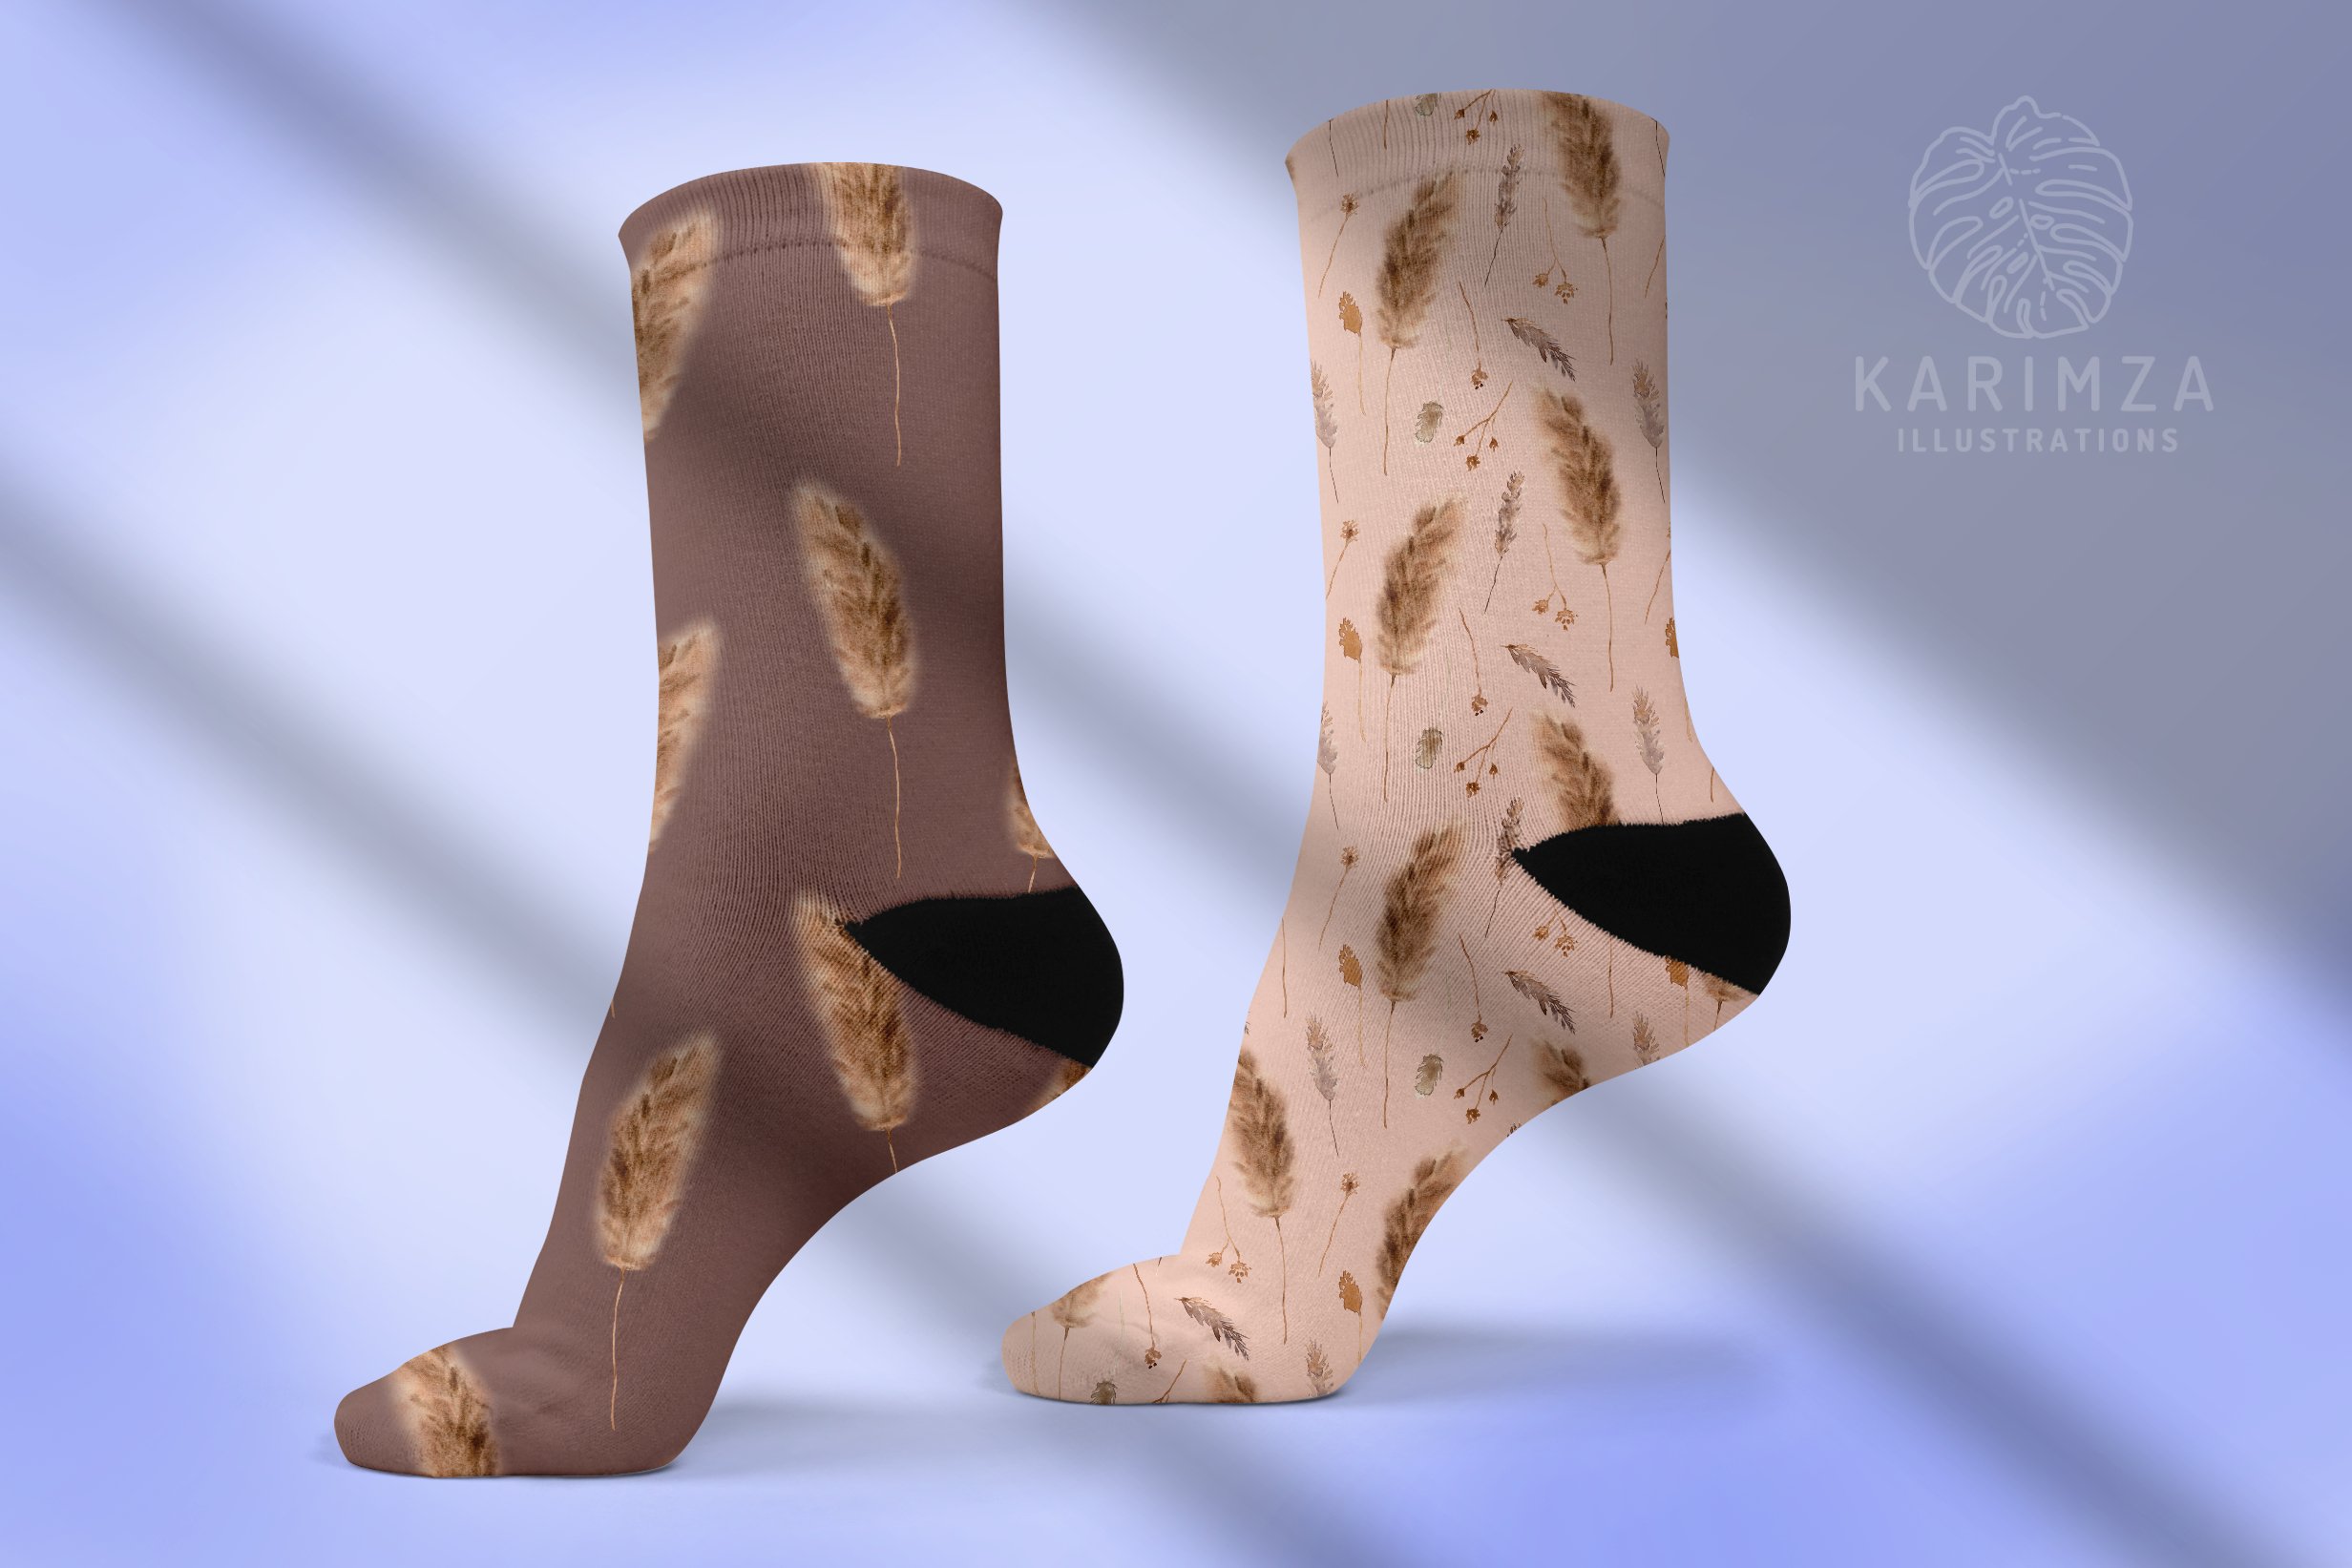 Pair of socks with brown spots on them.